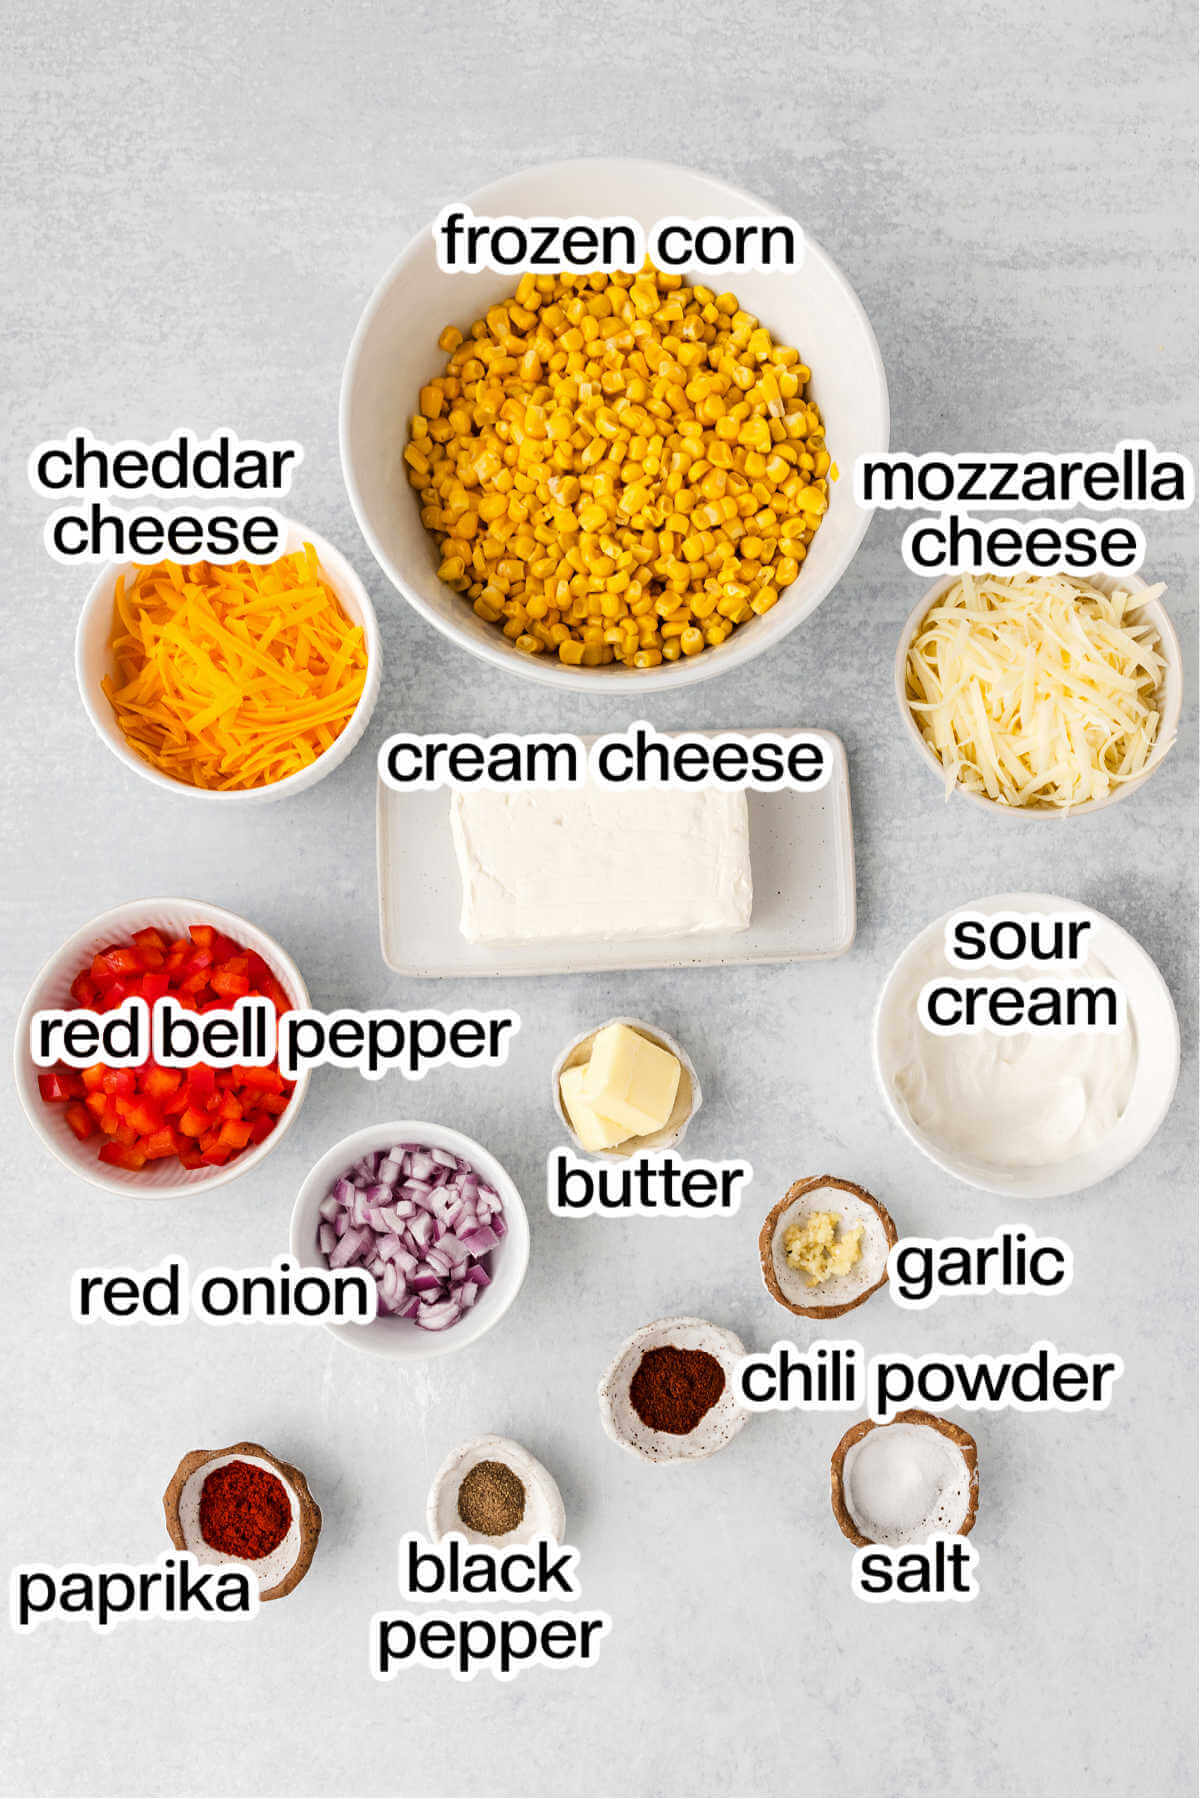 Ingredients for corn dip on a table.